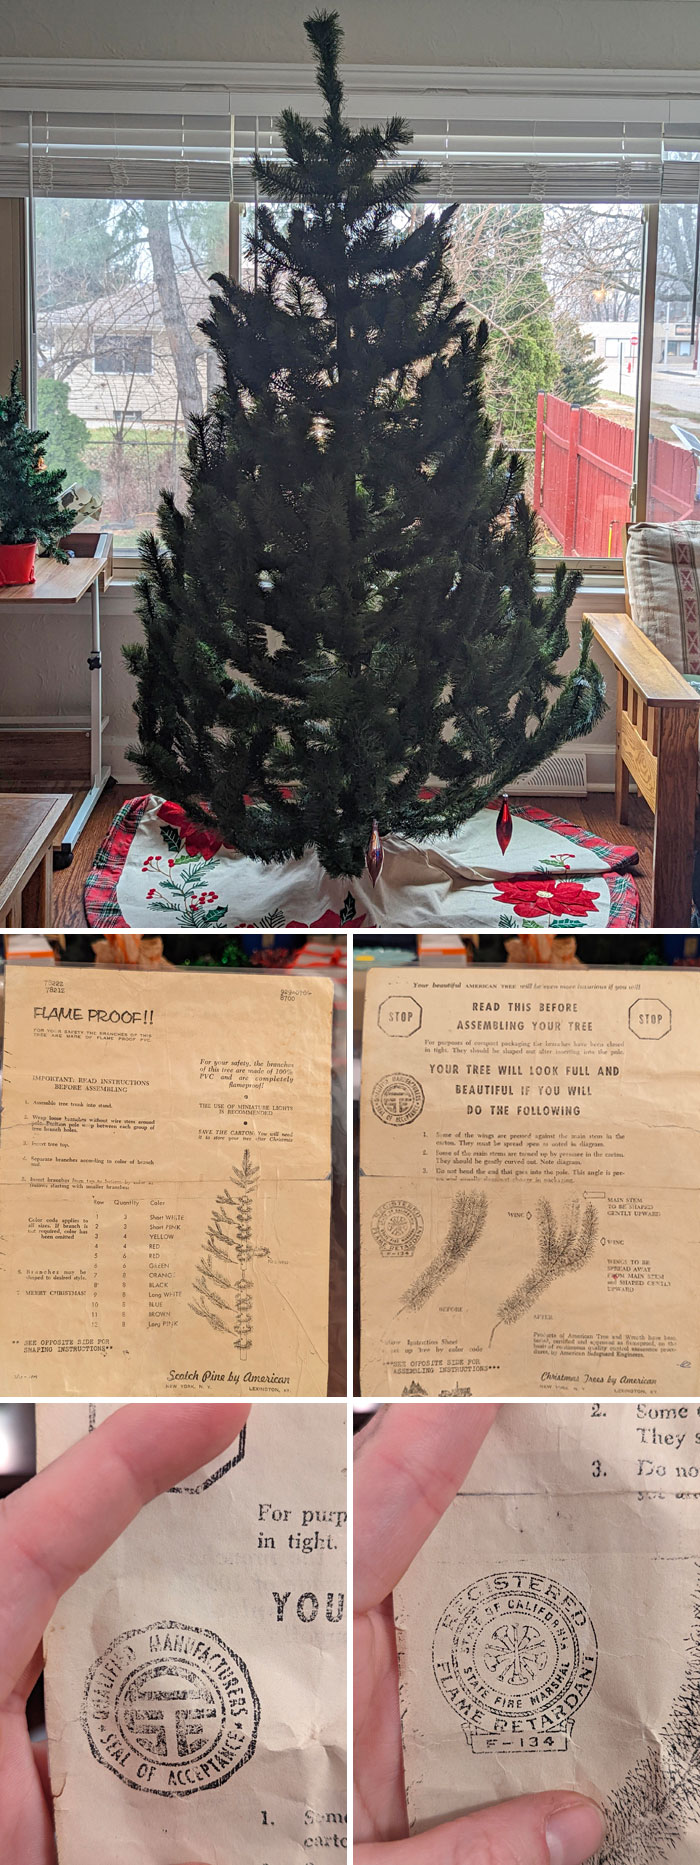 This Tree Has Been Passed Down Through Four Generations Of People. I Don't Know The Exact Age, But It Predates 1940